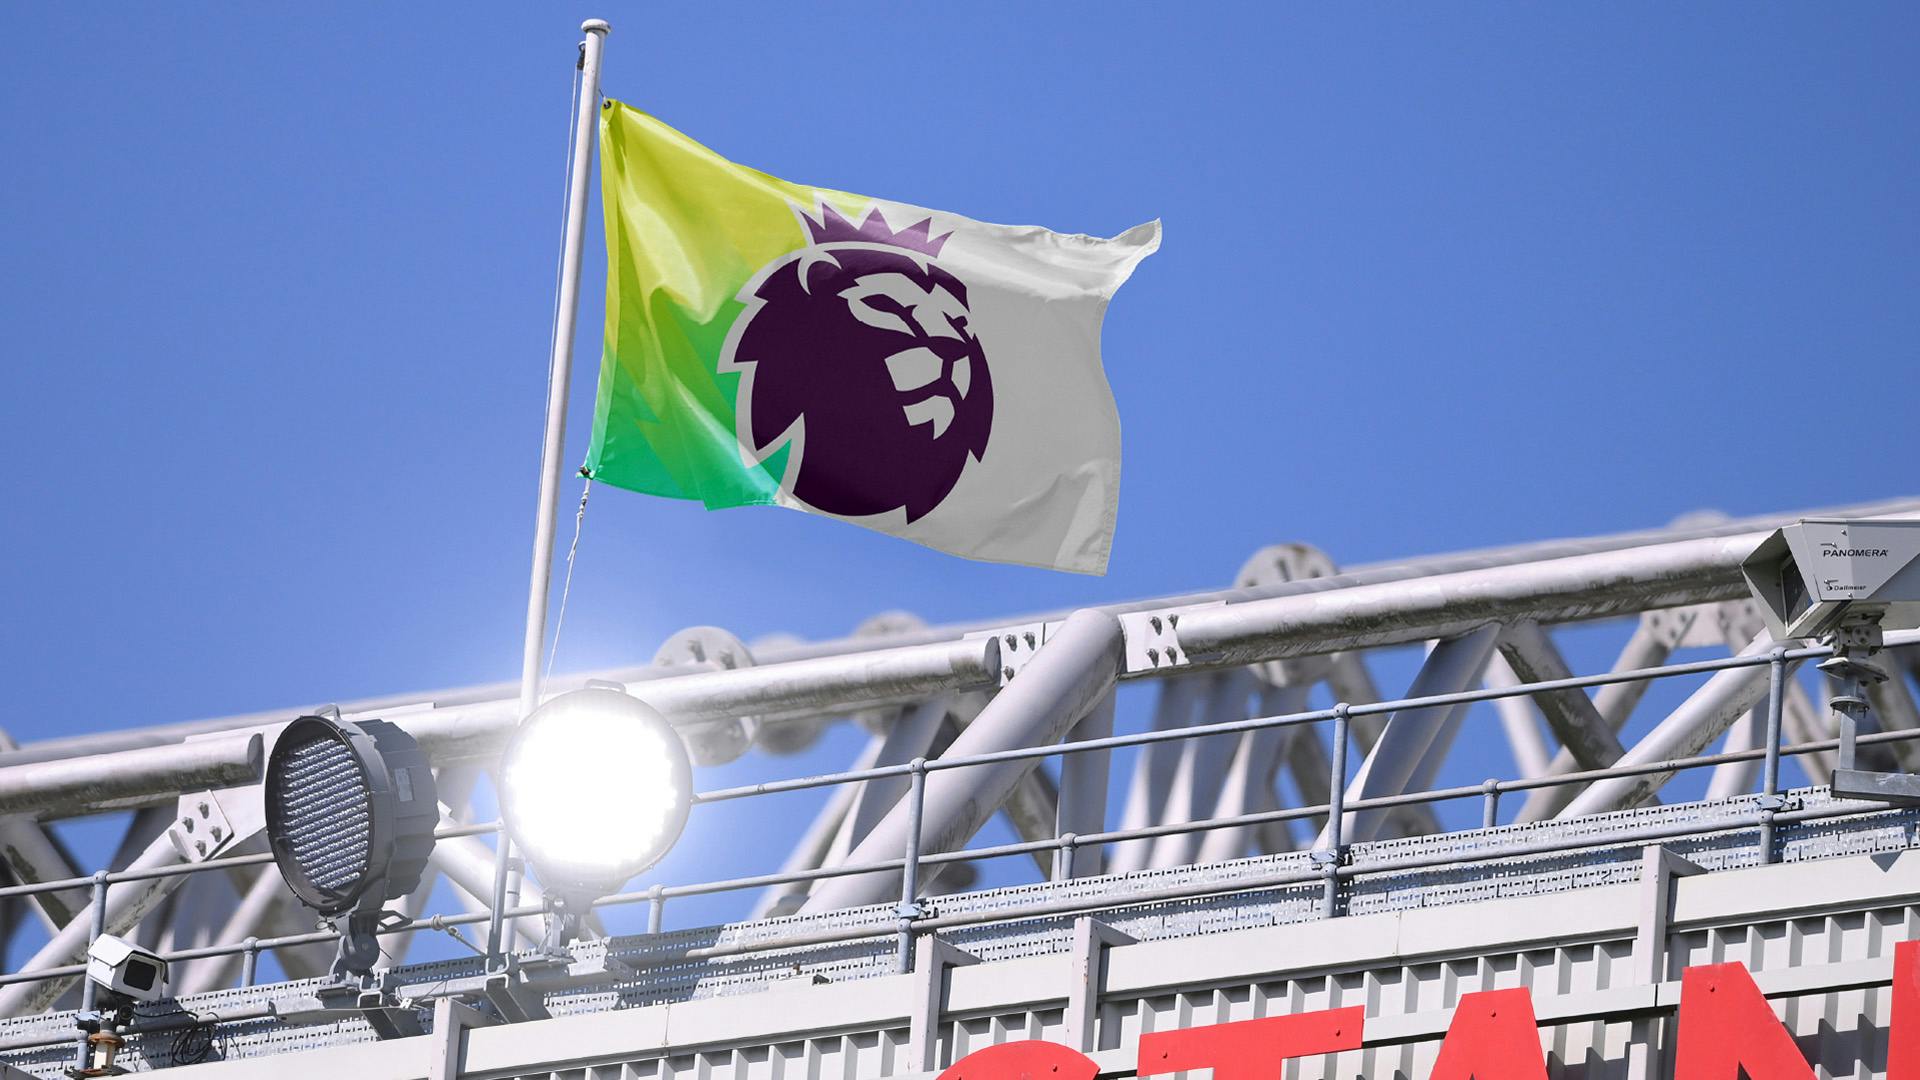 Photo from the Premier League brand refresh showing the purple lion icon on a flag with a part white background and a part yellow and green background